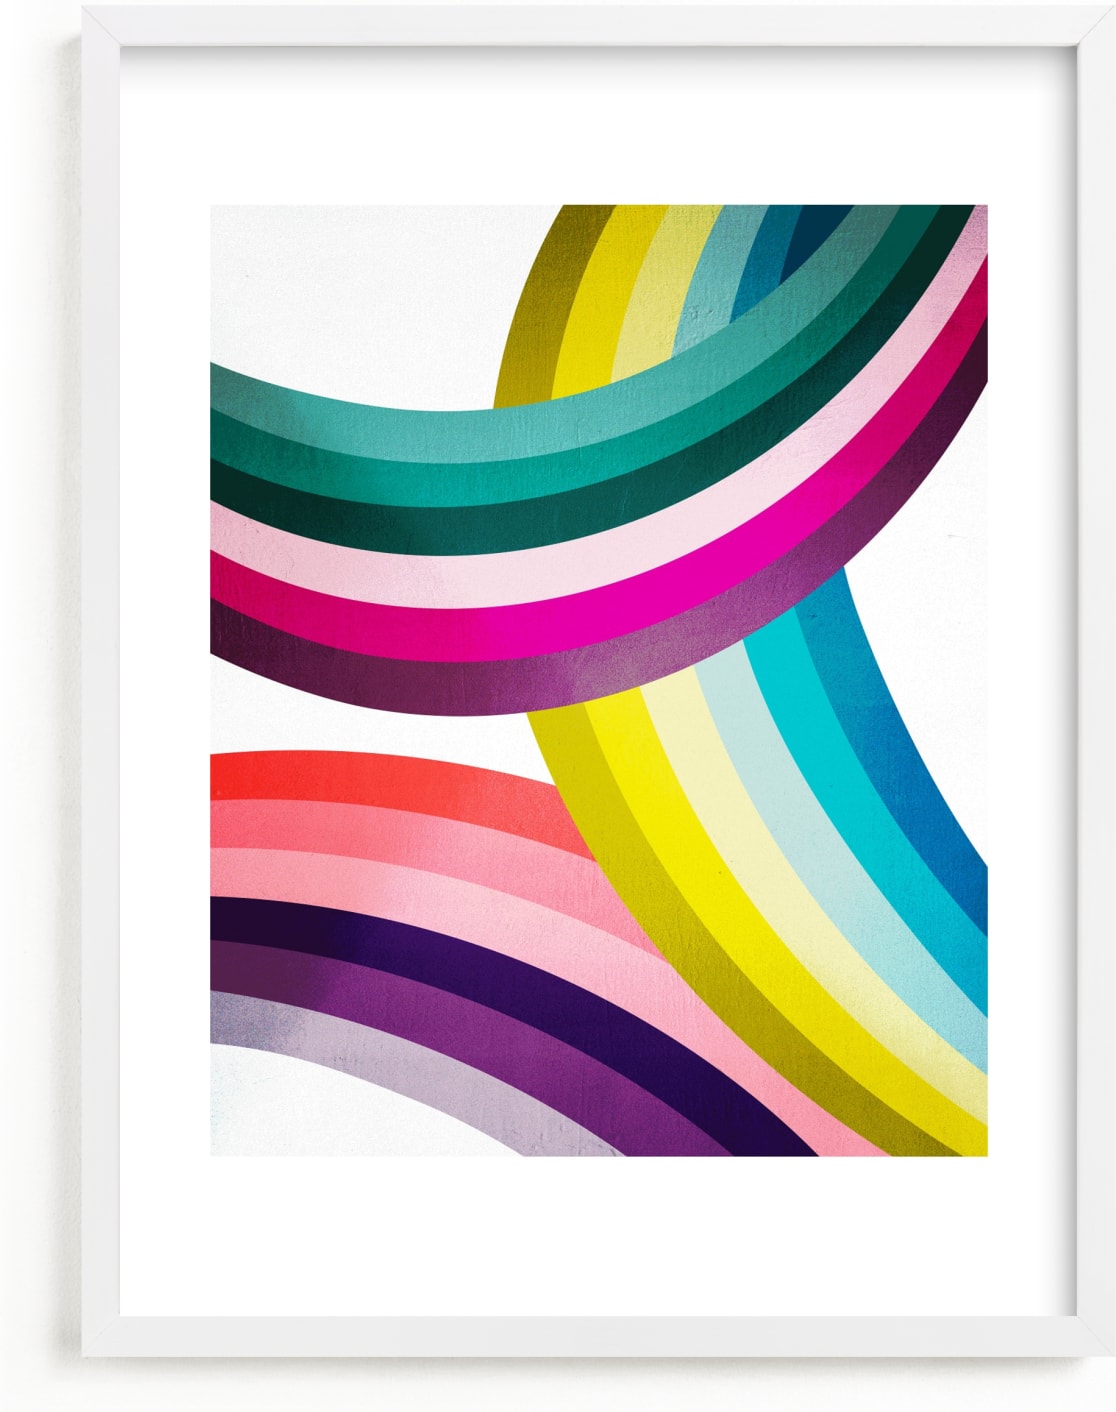 This is a colorful kids wall art by Jen Florentine called Rainbow Waves.